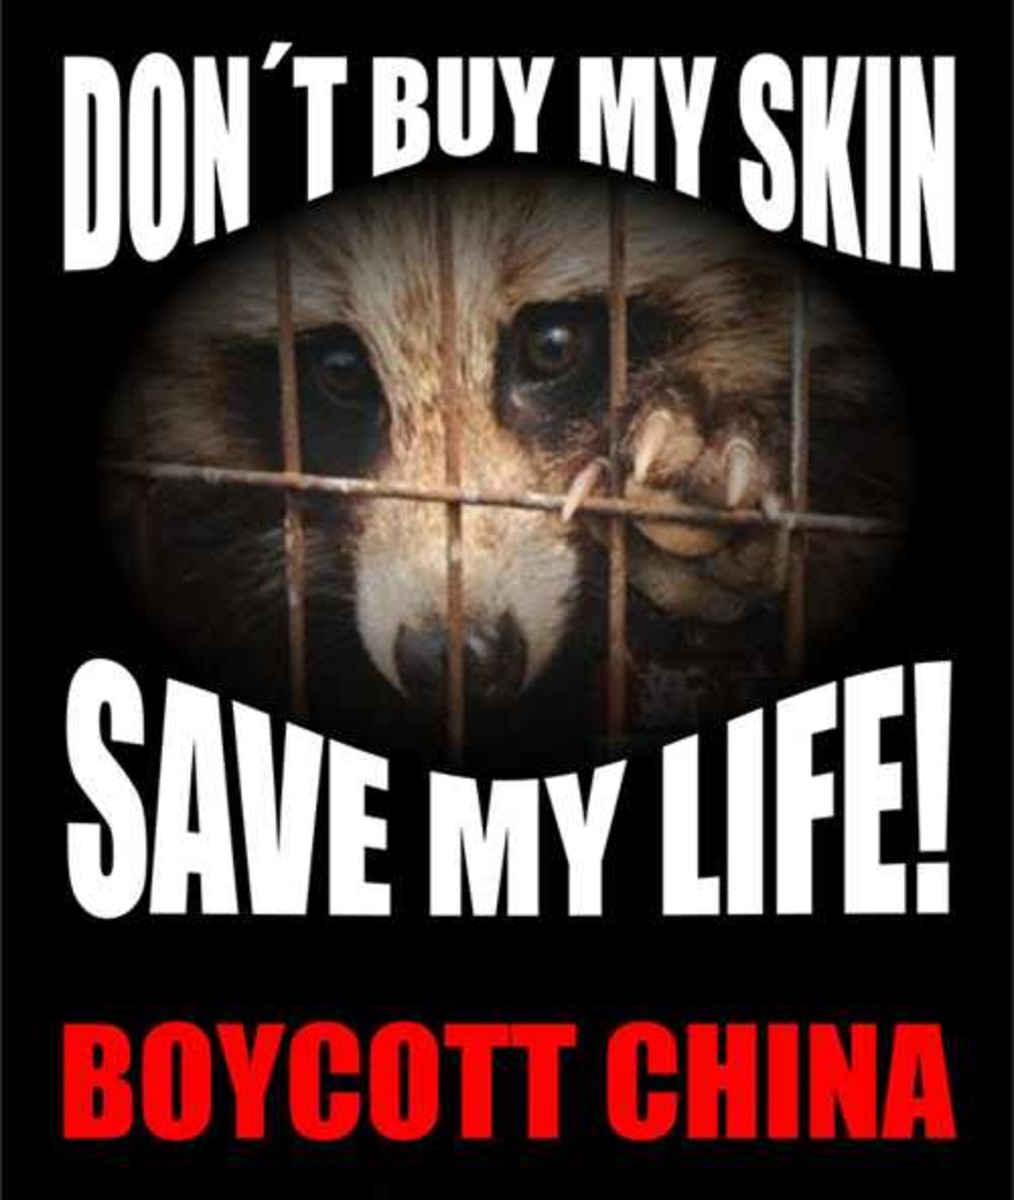 Raccoon Dog adult.  It's not difficult to boycott products Made in China.  You just don't buy them.